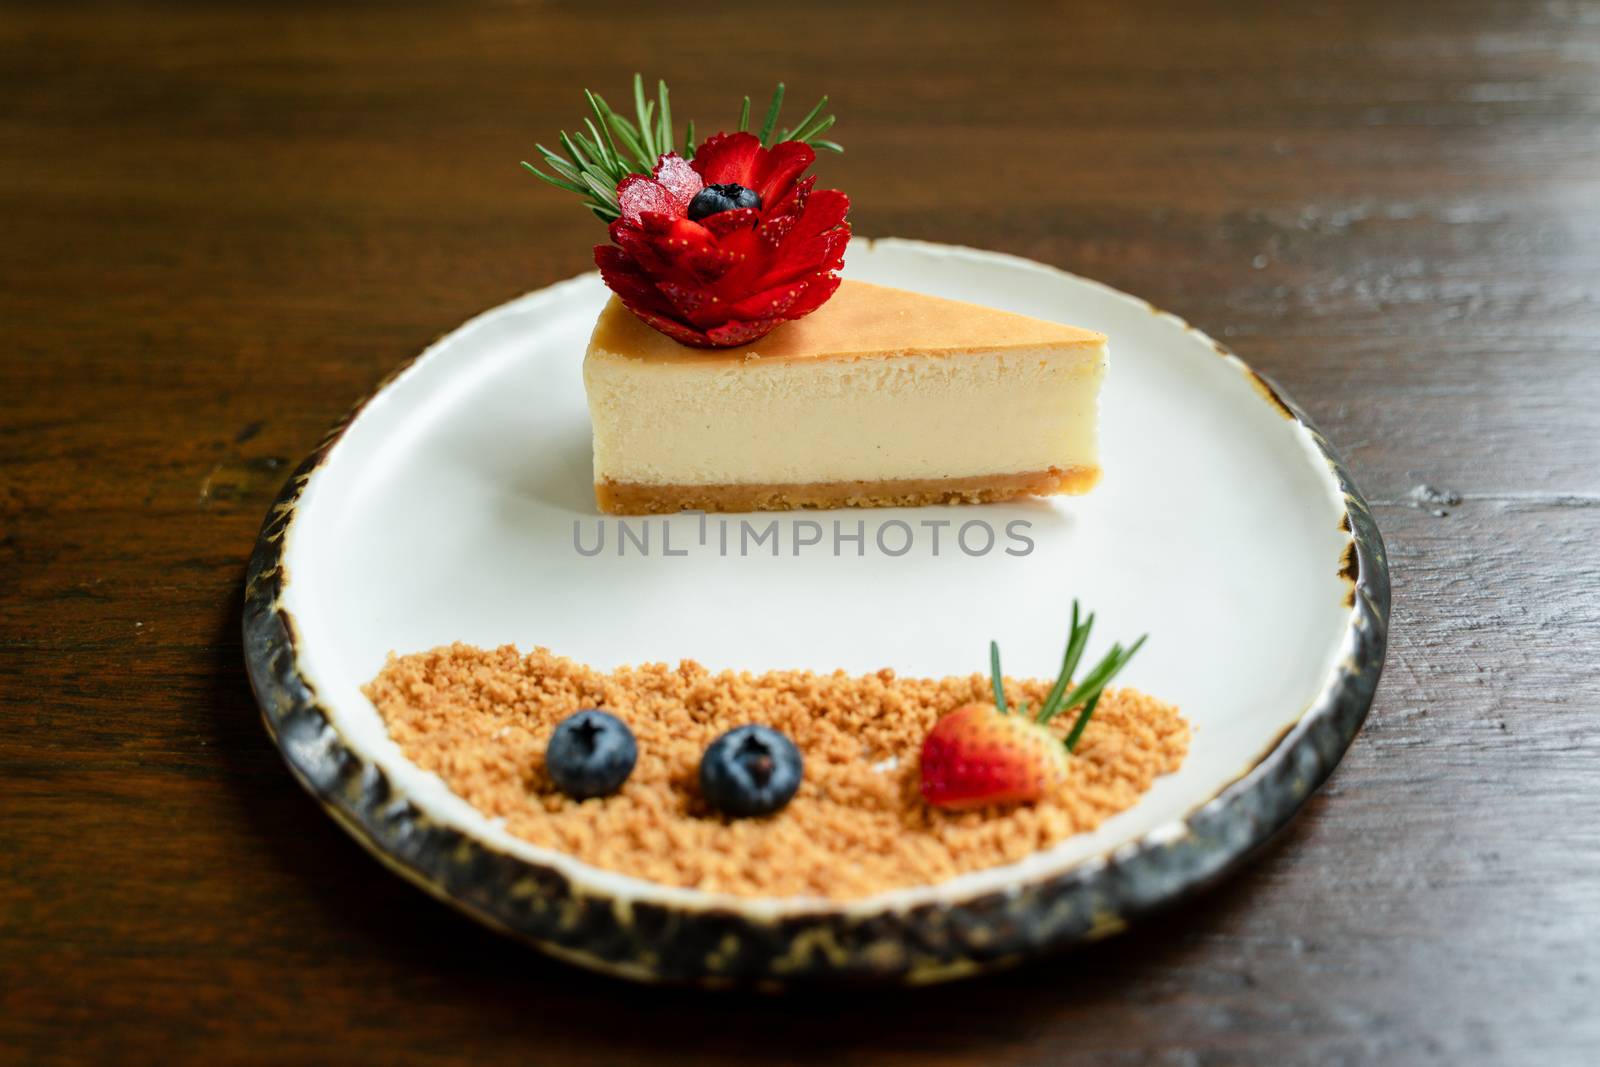 Top view photos of beautifully decorated cakes on white tiled pl by ToonPhotoClub